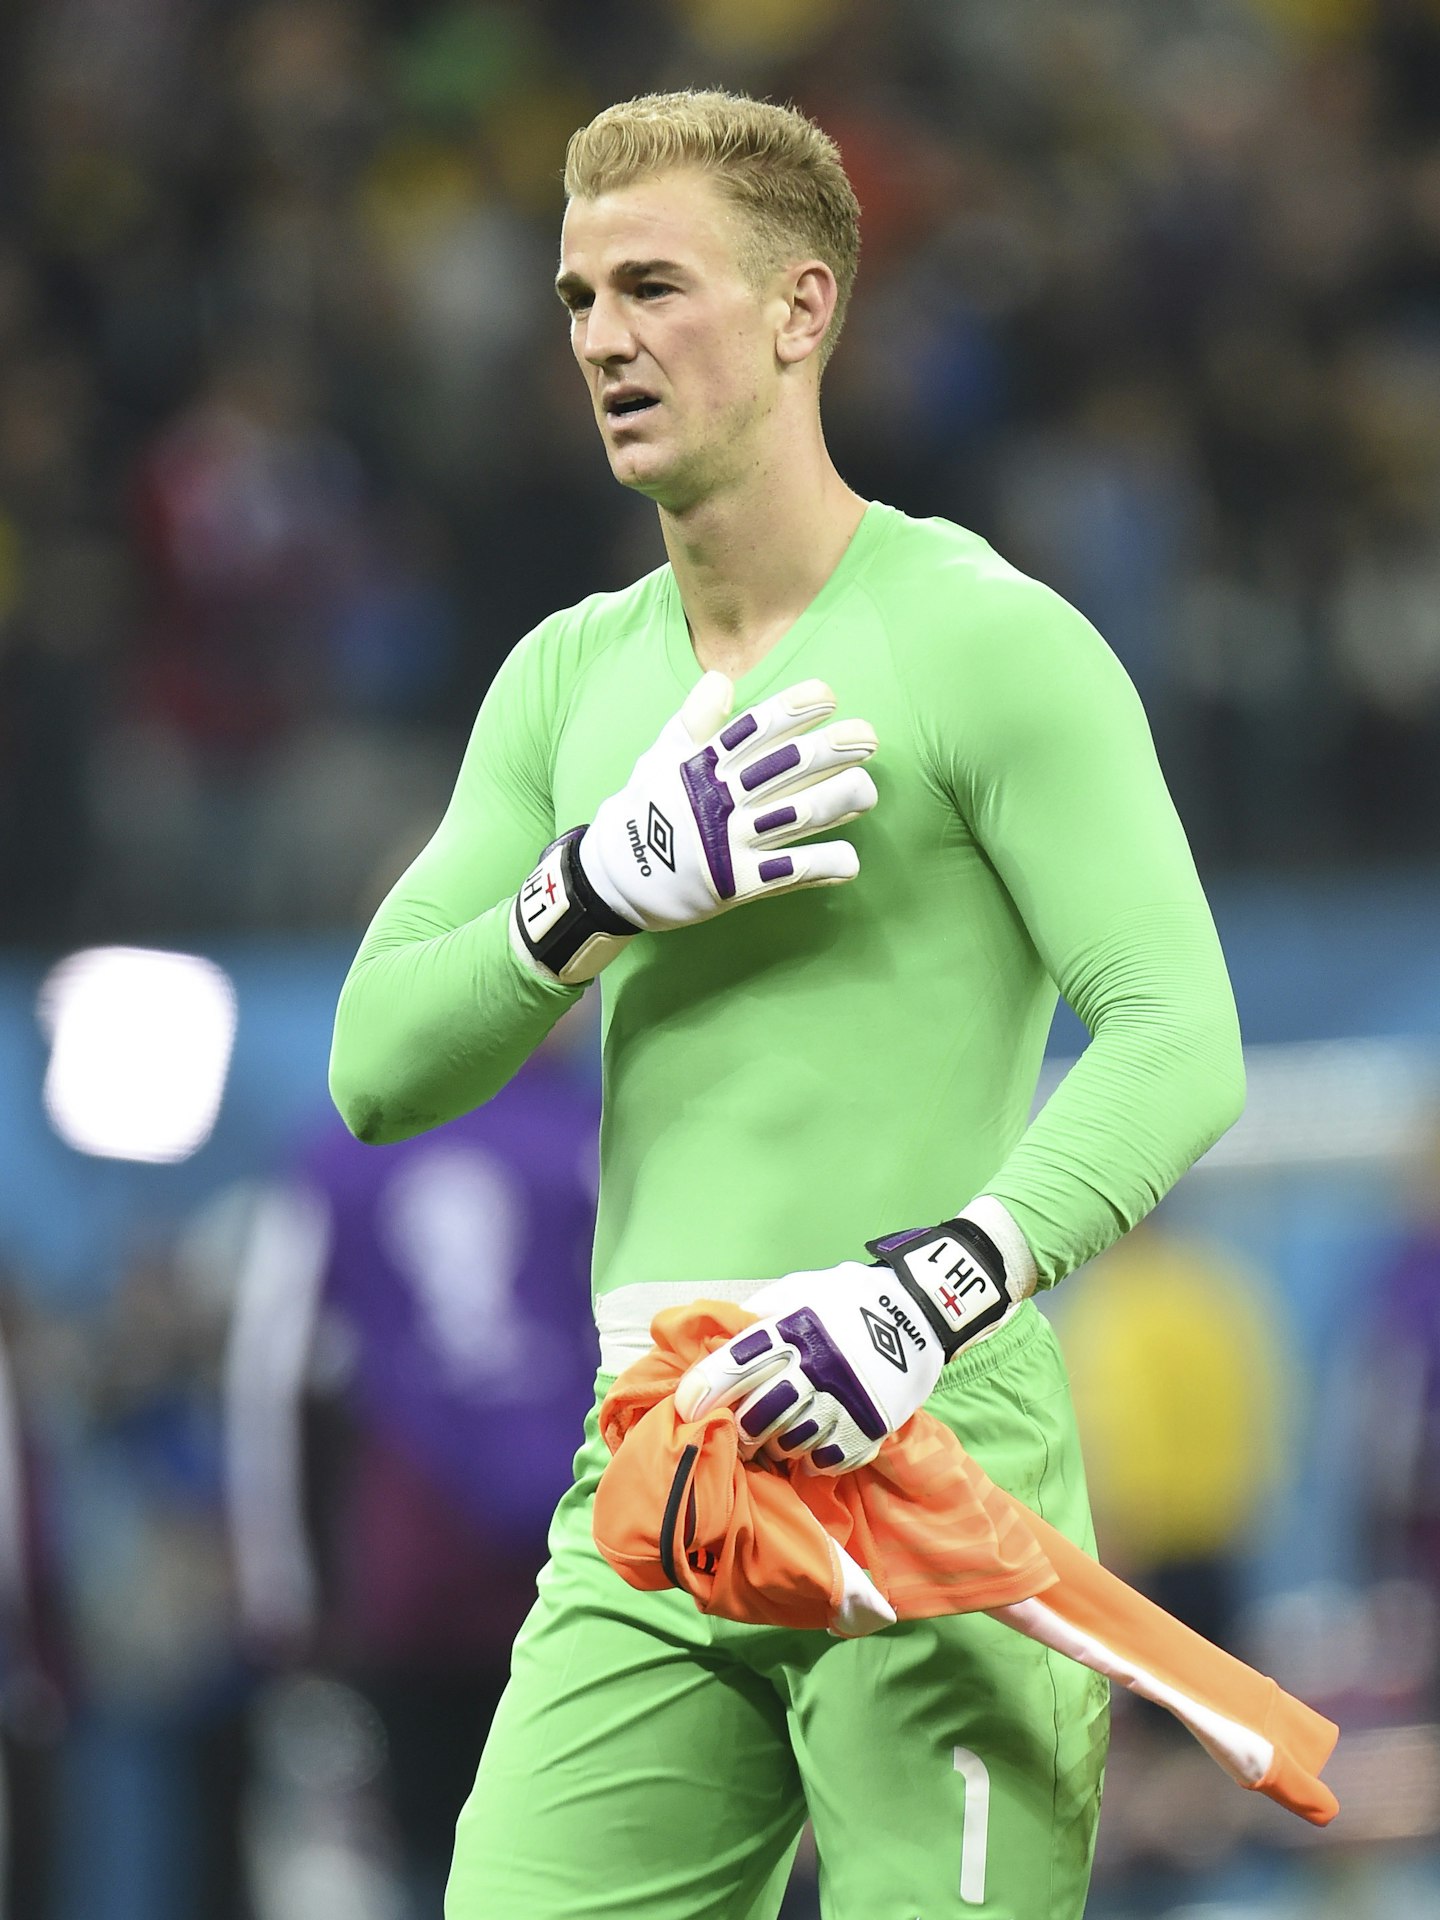 Joe playing for England in the World Cup 2014